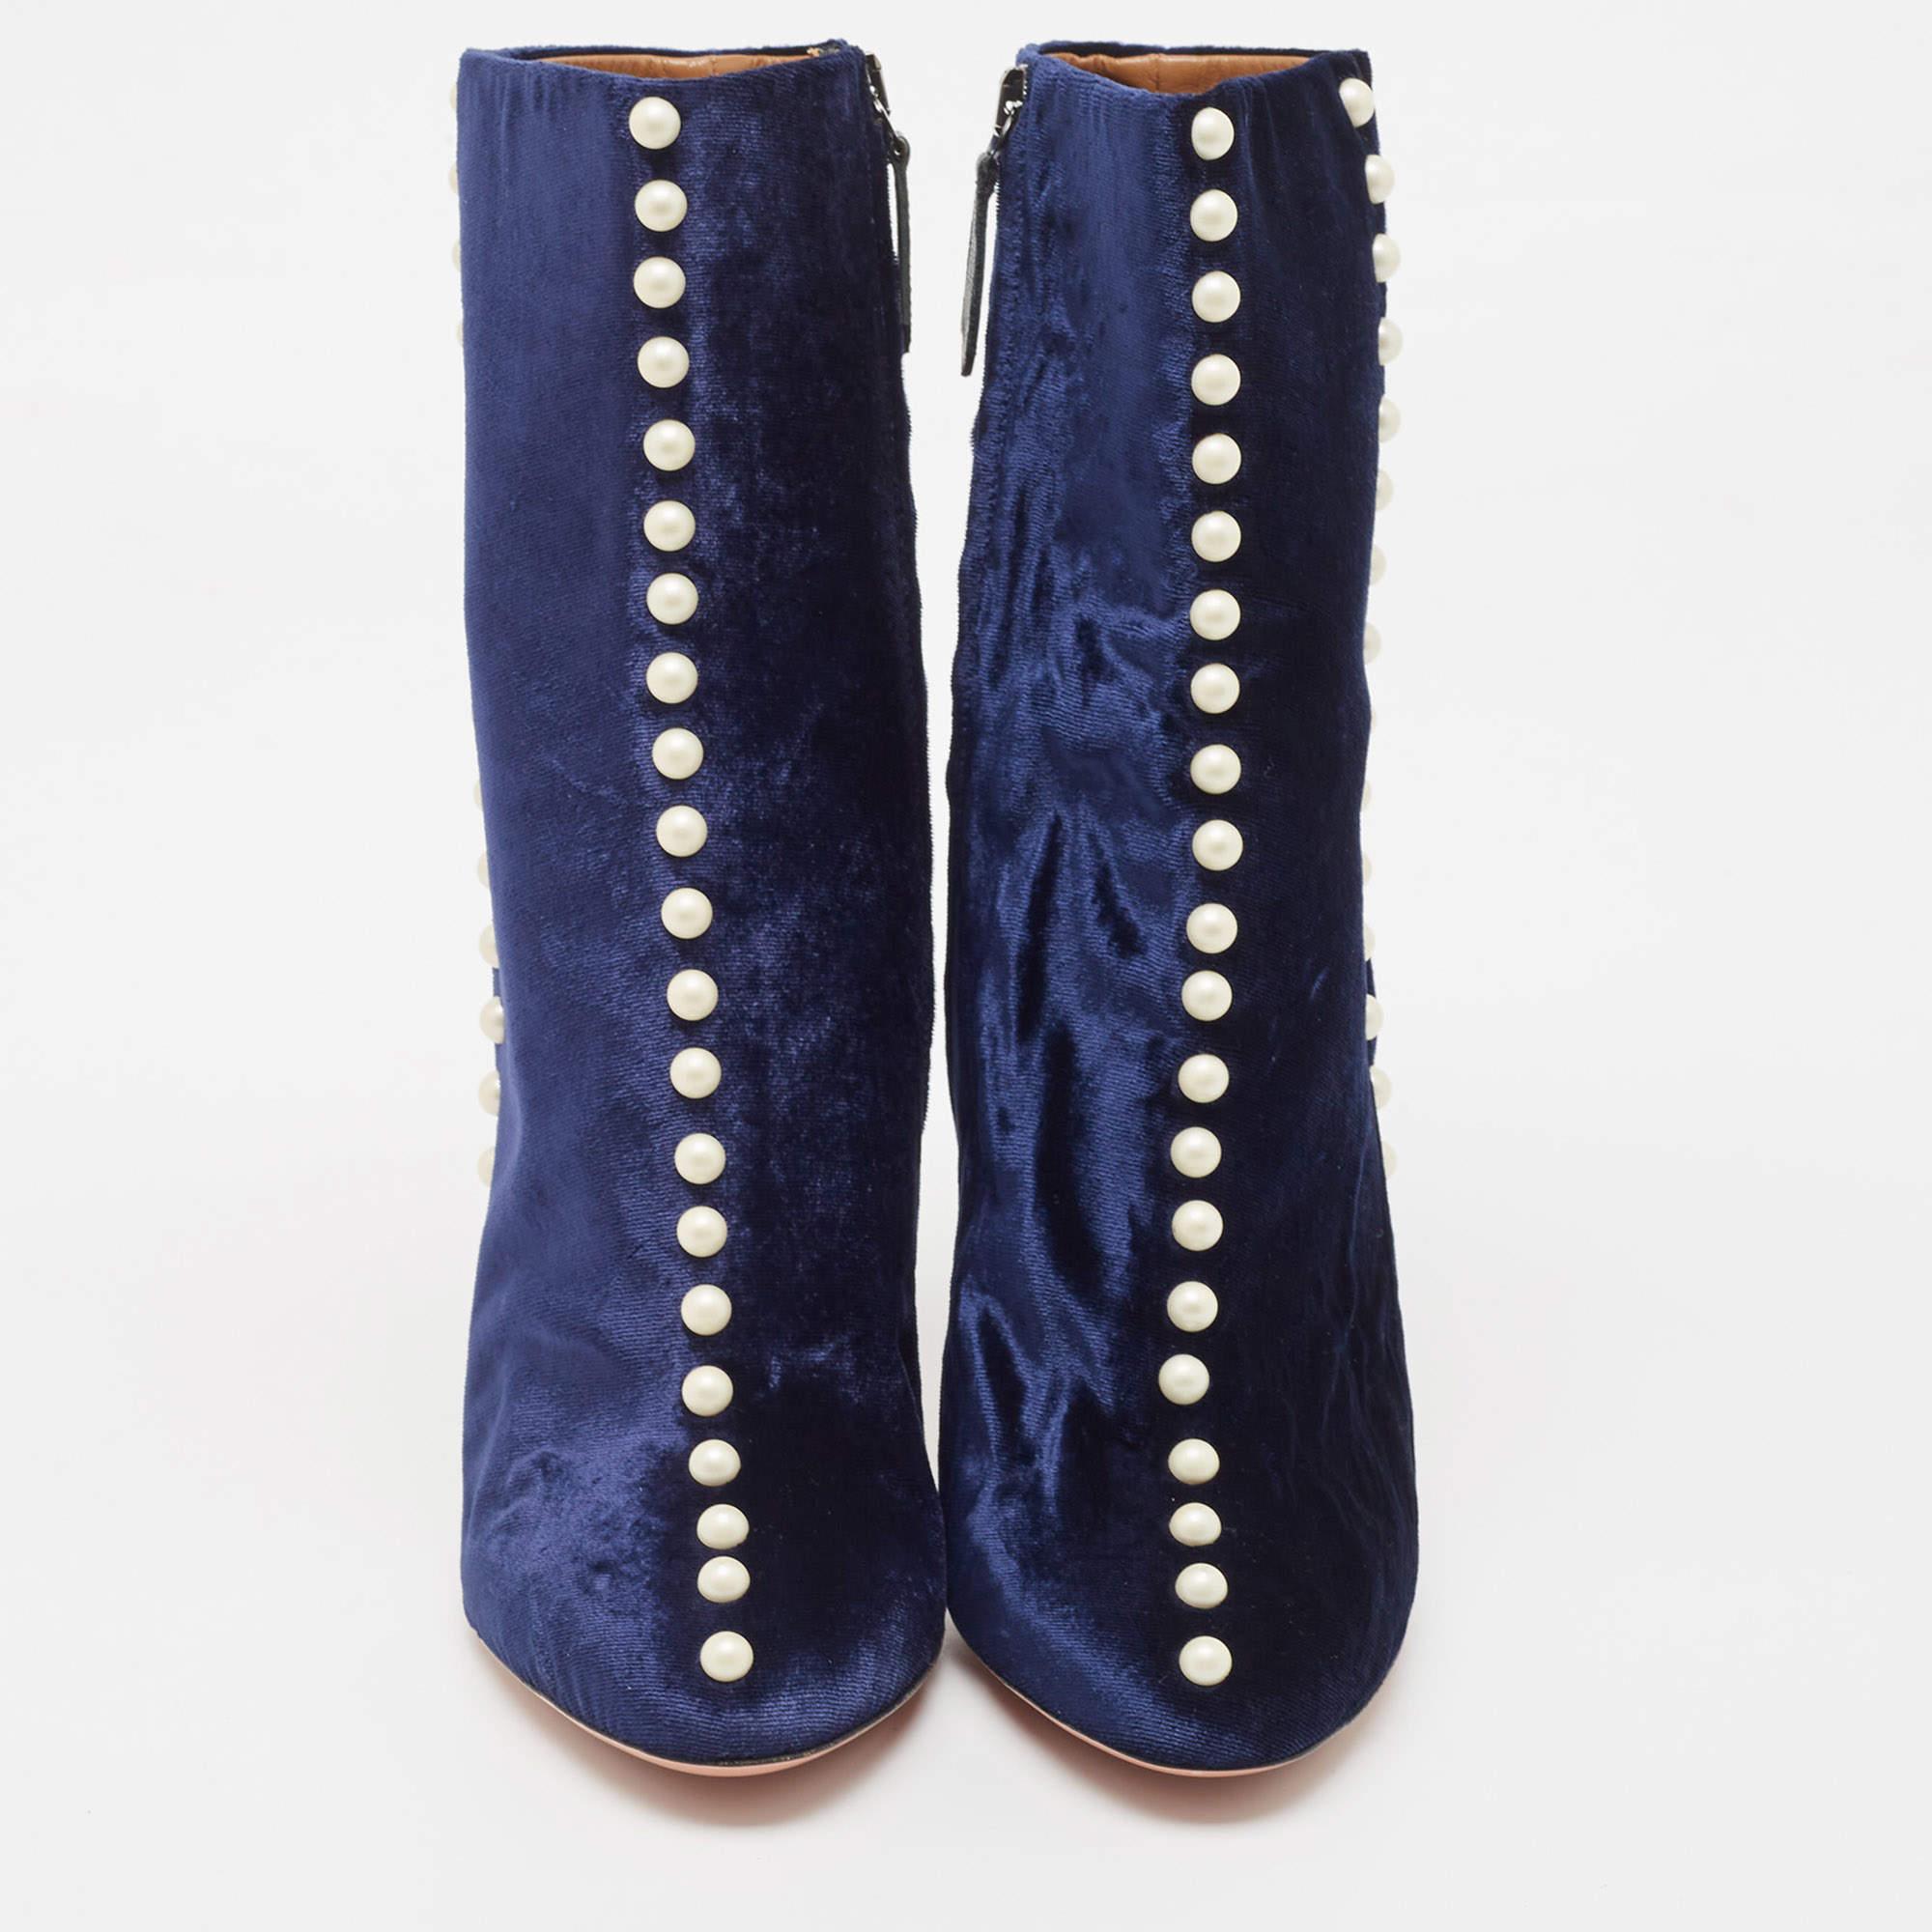 These Aquazzura boots are super stylish and will incorporate a luxe element into your attire. They are crafted using velvet and are highlighted with pearls. Update your shoe collection with these boots.


Includes: Original Box